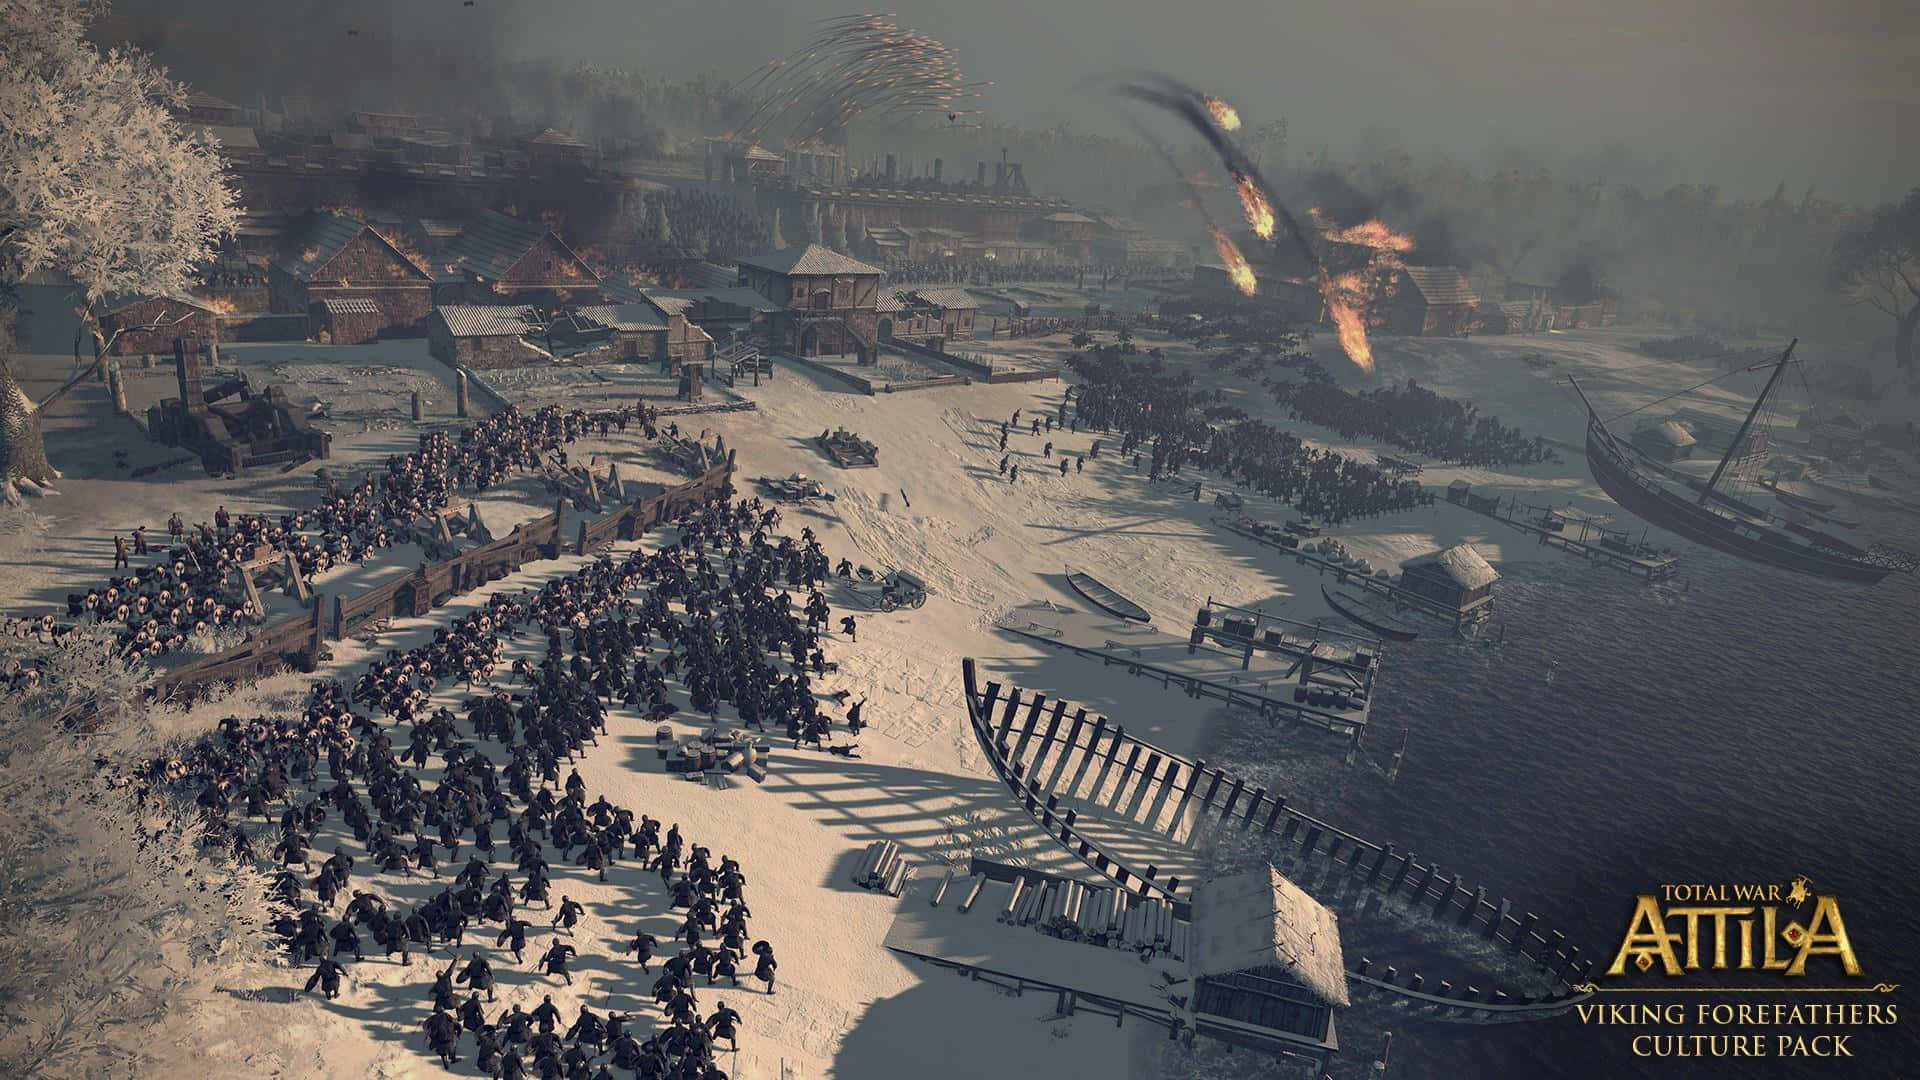 Experience Total War Attila, the game developed and published by Sega